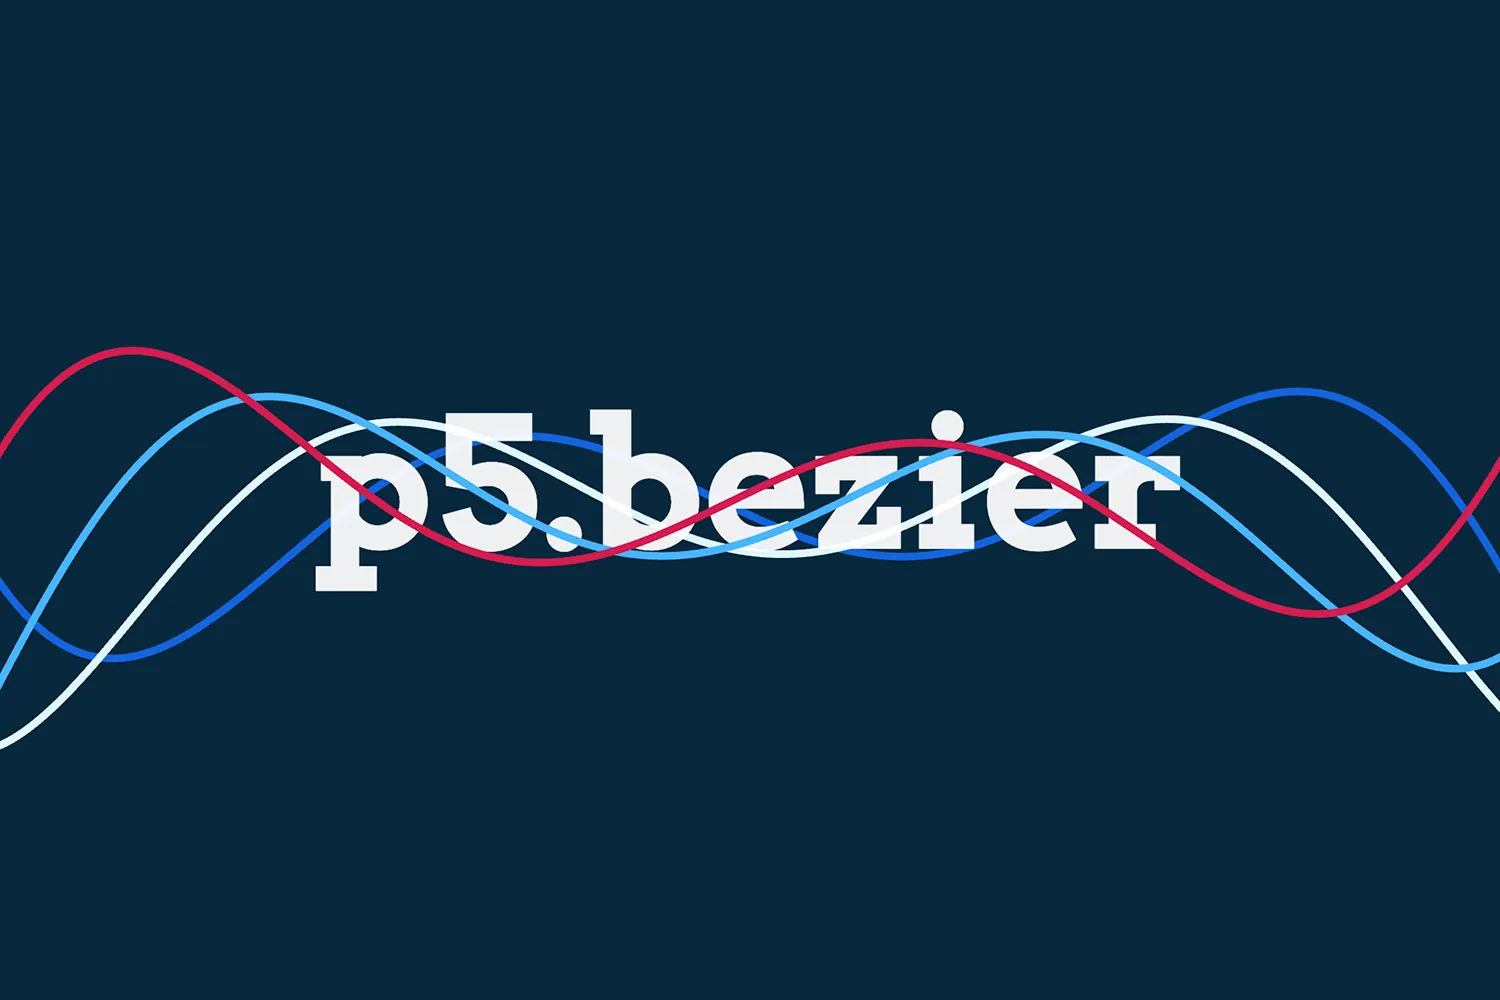 The p5.bezier text with curves of different colors.